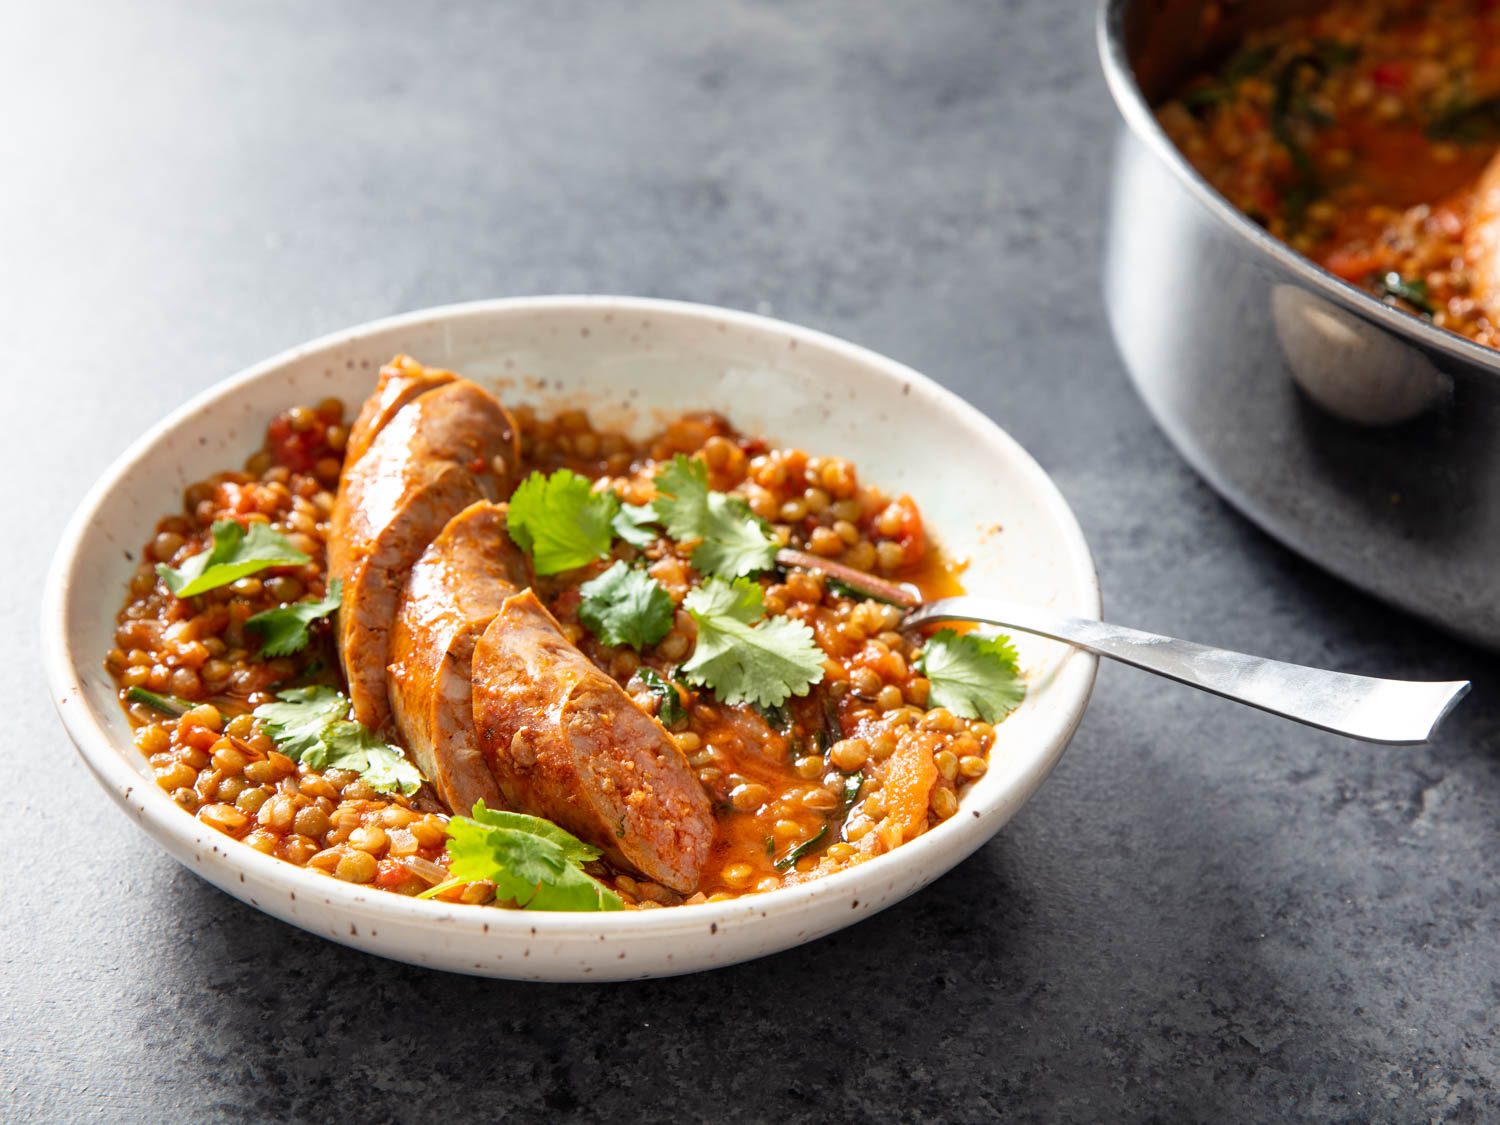 Cumin-Scented Lentils With Sausage and Dandelion Greens